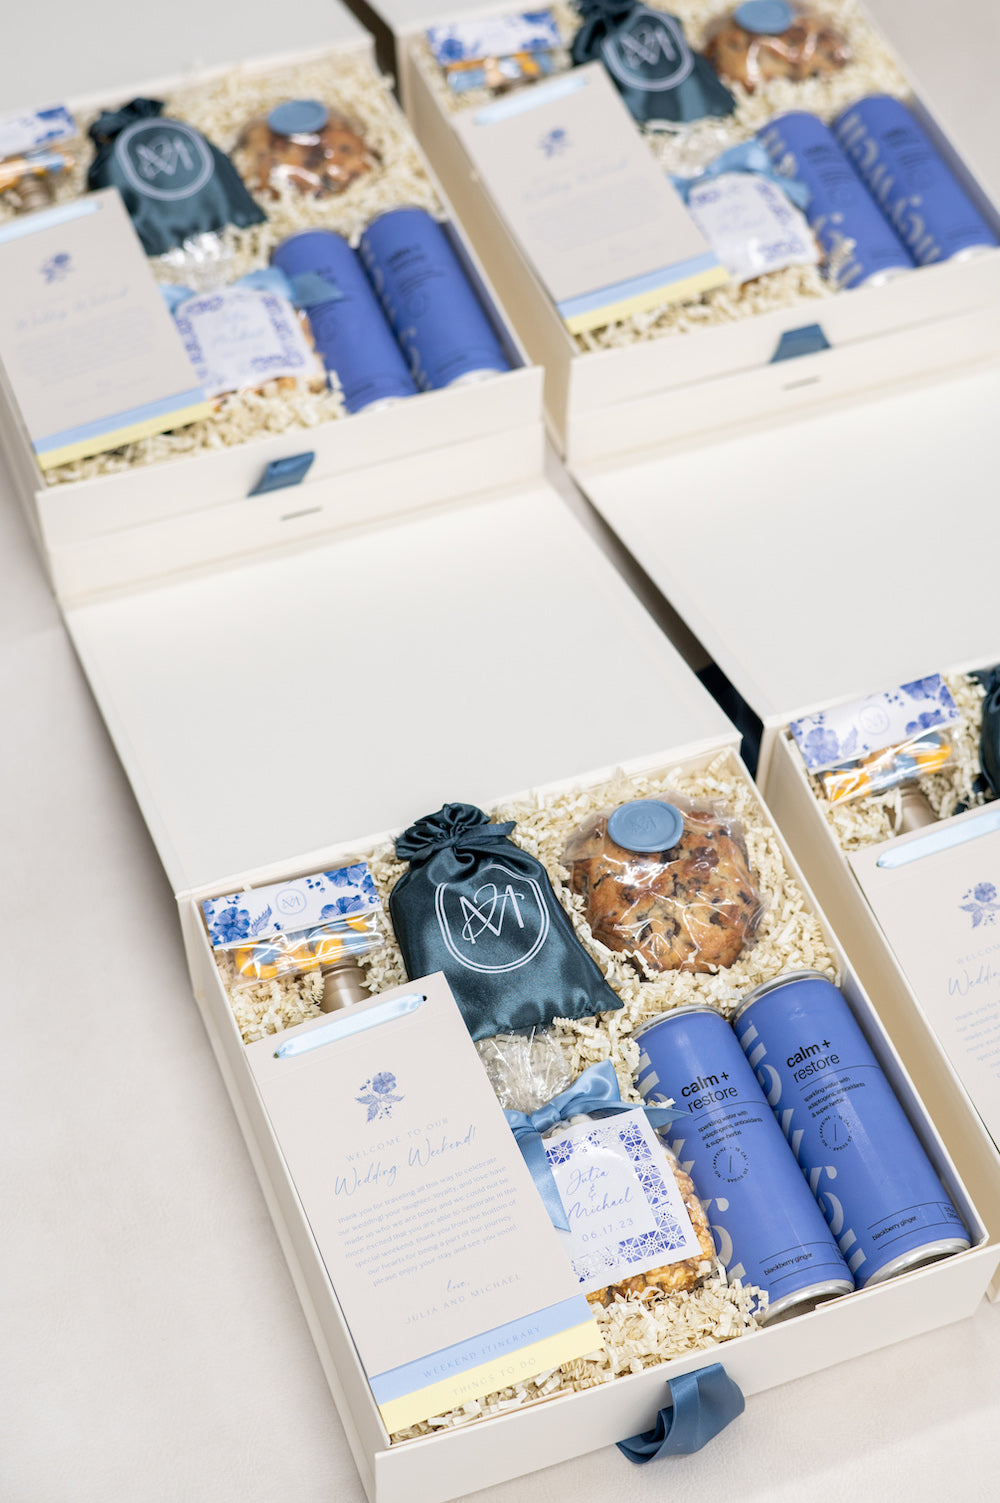 Custom Monogrammed Dusty Blue Welcome Gifts Sets for Hotel Guests by Marigold & Grey